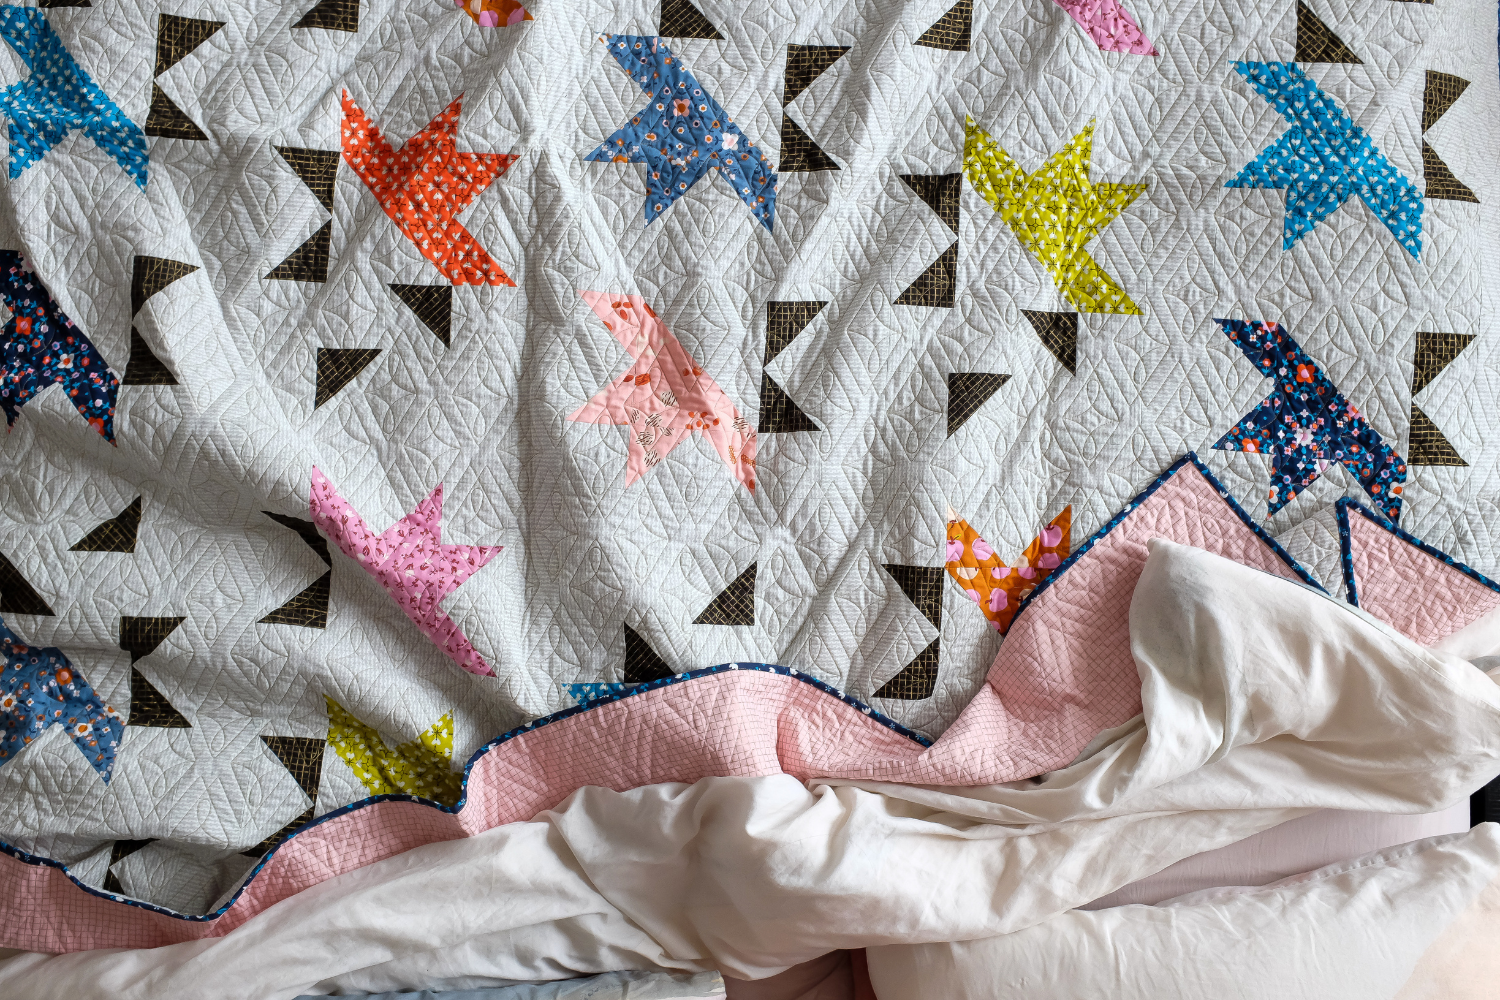 A quilt with small solid colorful slices of a starburst in reds, pinks, blues and yellows repeat next to smaller black triangles, leaving part of each star’s center in white, which is the same colors as the quilt’s background.